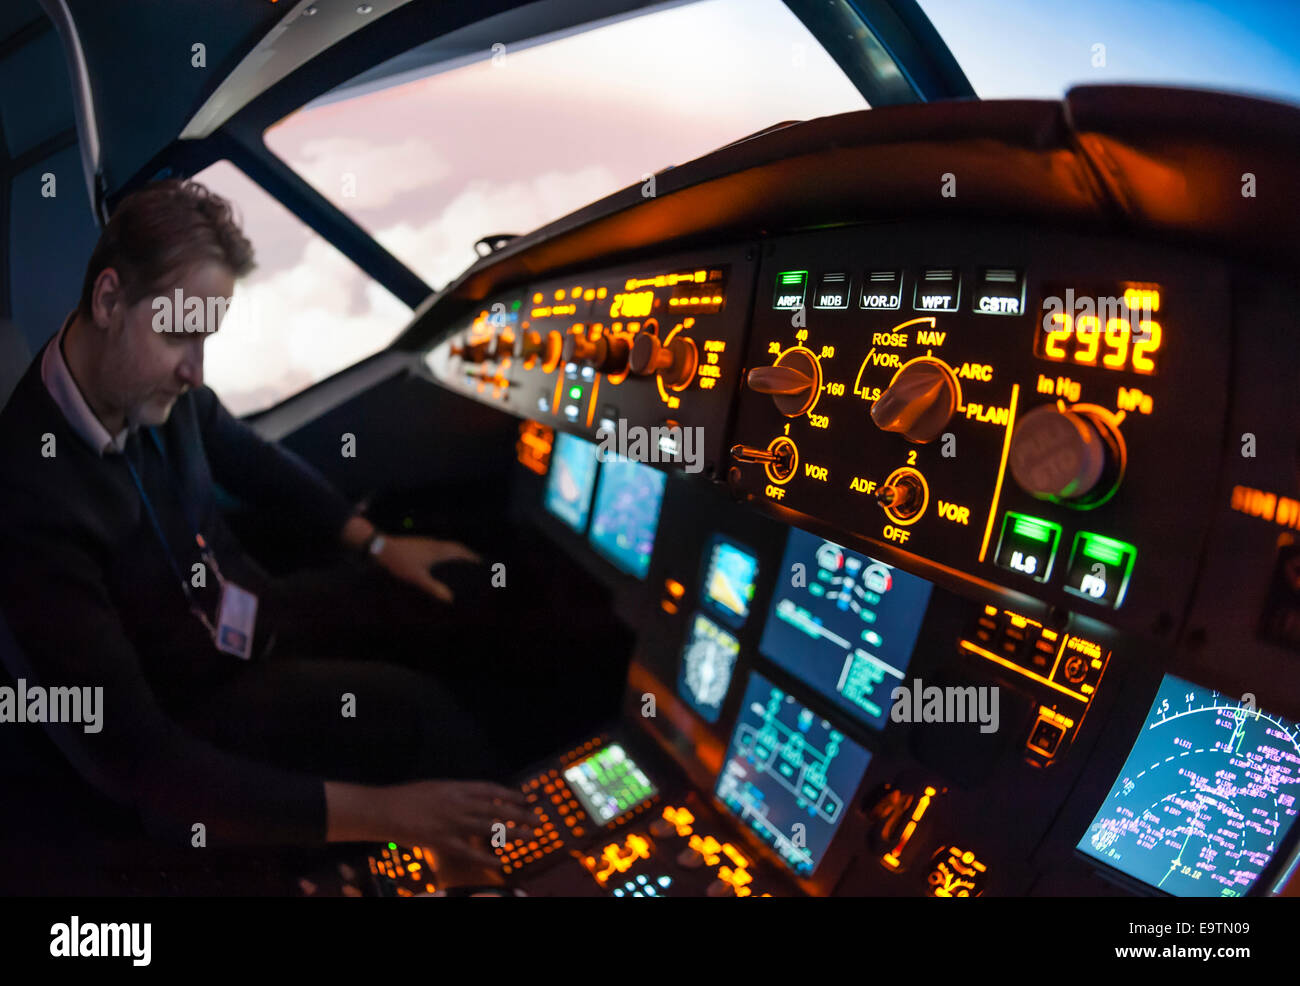 Cockpit of an Airbus A320 flight simulator that is used for training of professional airline pilots (pilot adjusting autopilot). Stock Photo